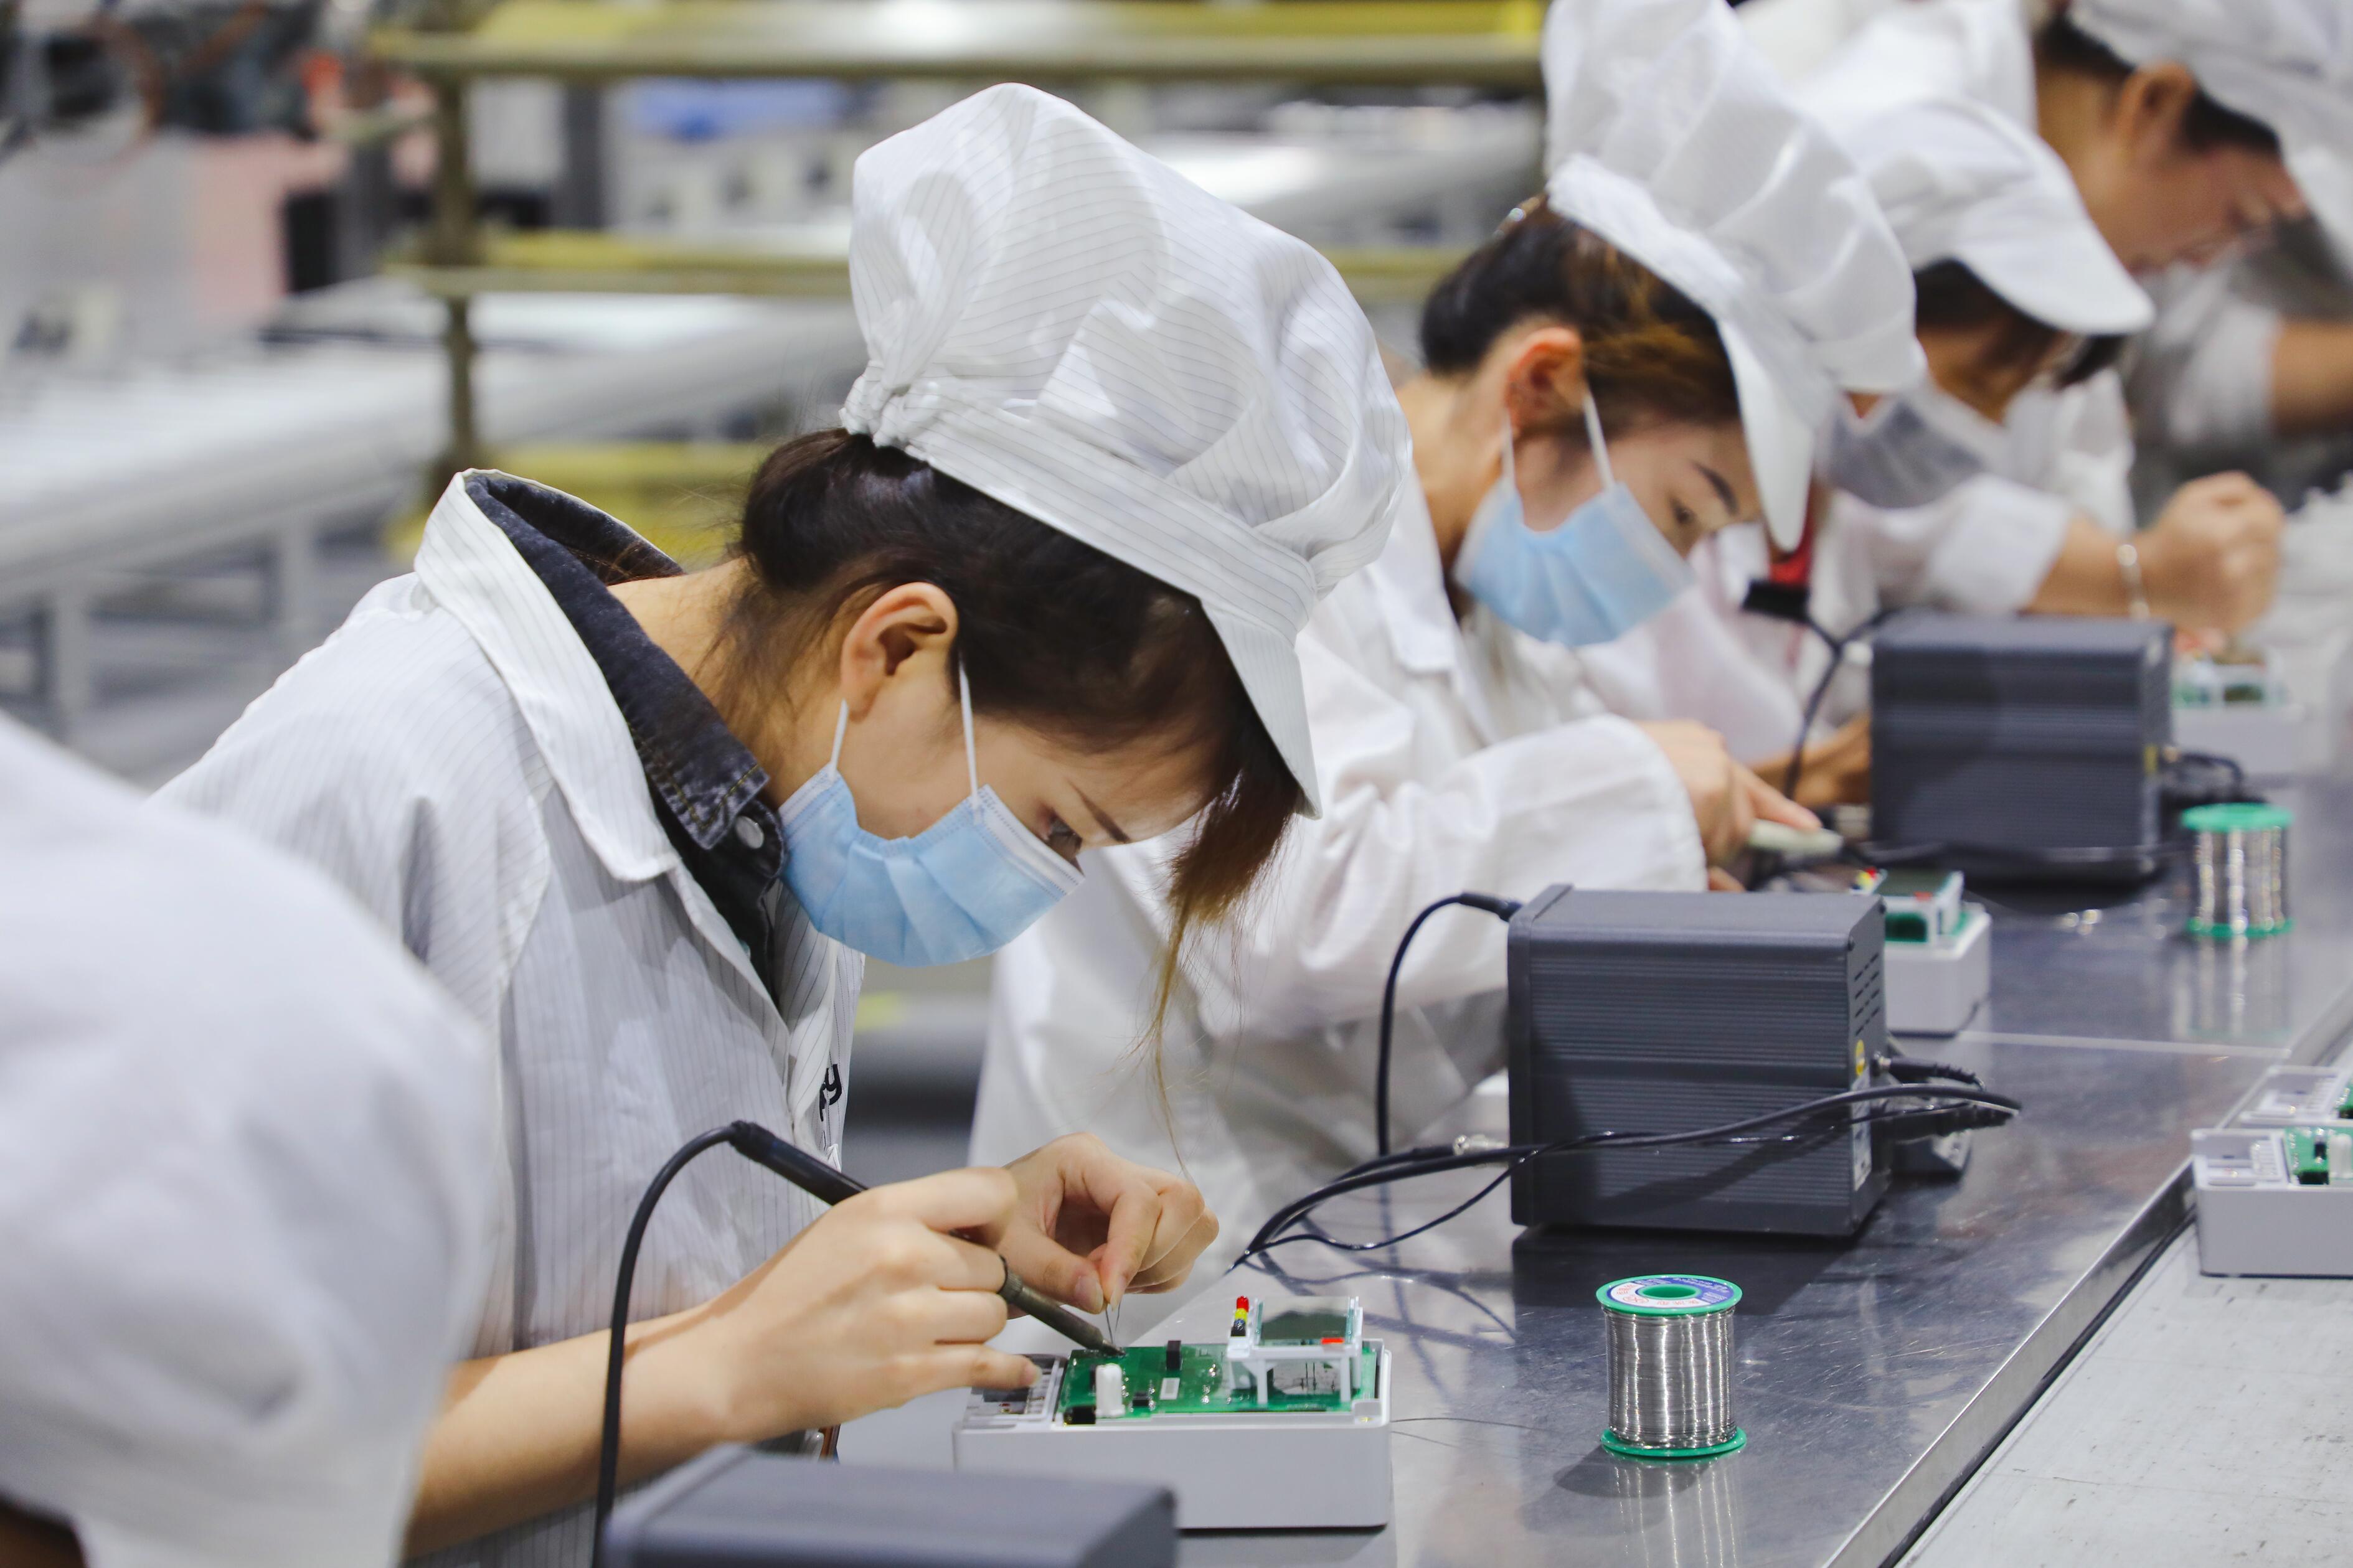 Holley Technology Single Phase Meter Production Line Assembly Skills Competition